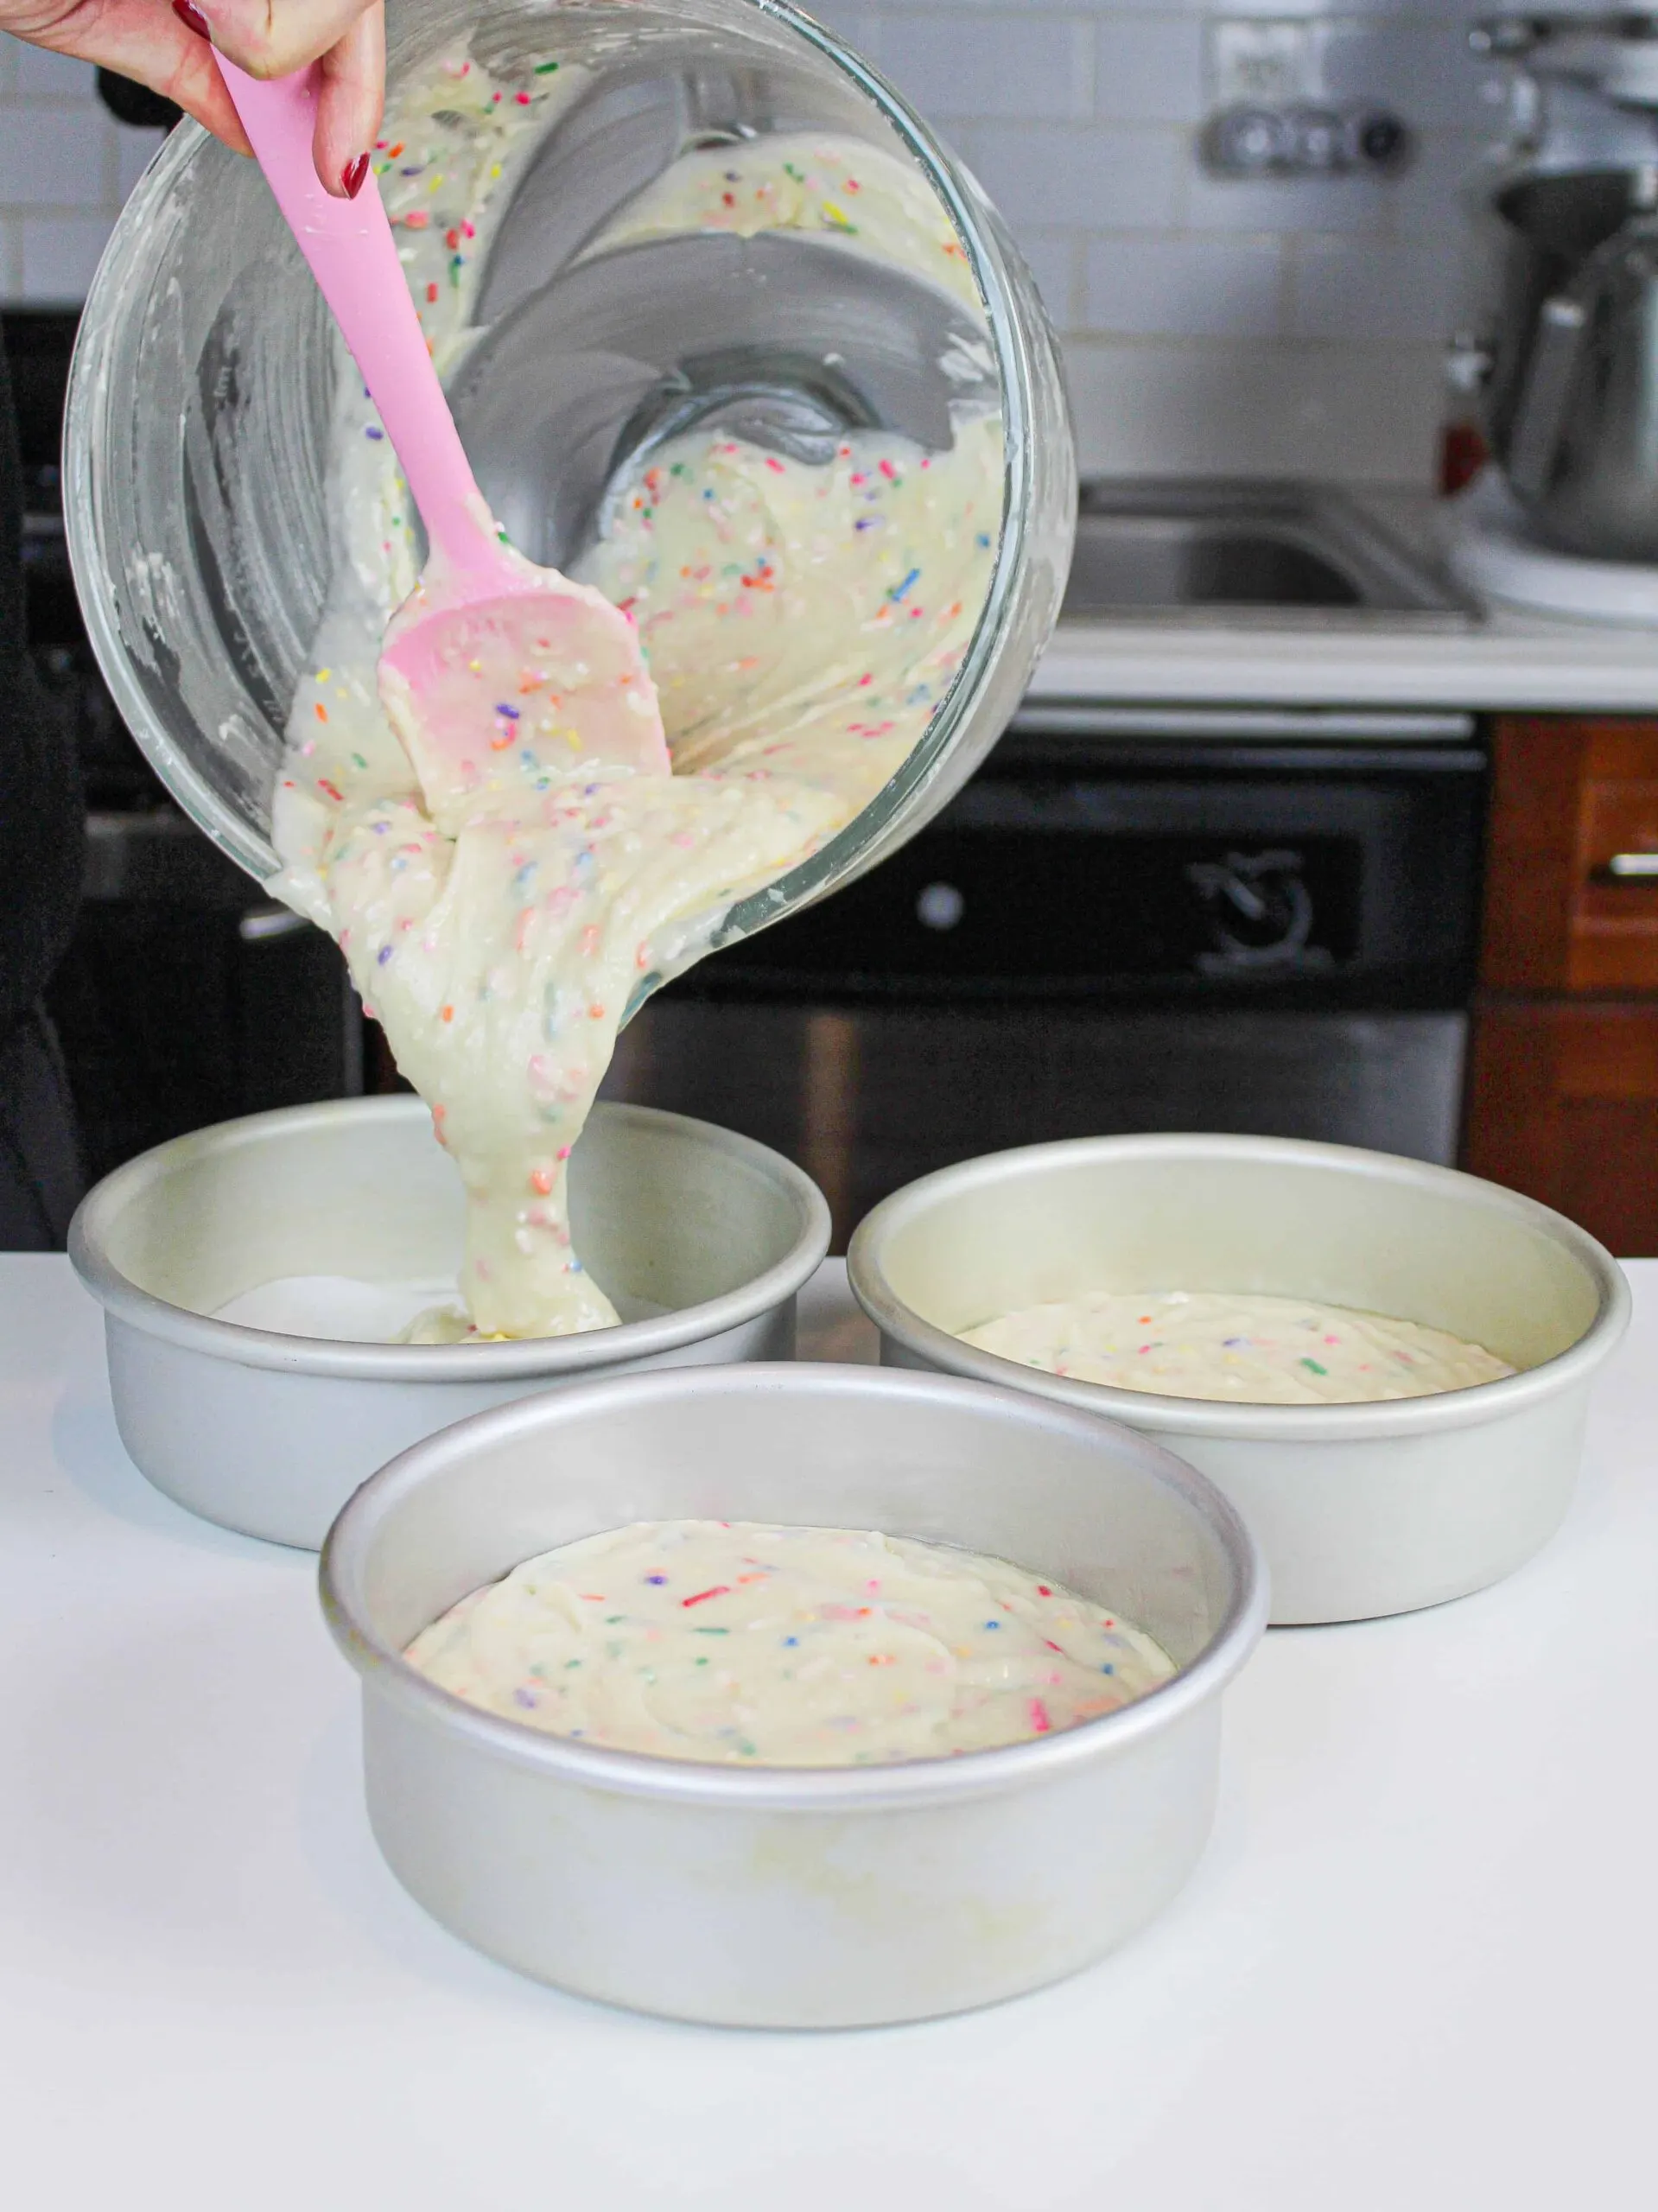 image of pouring funfetti cake batter in three, 6-inch cake pans